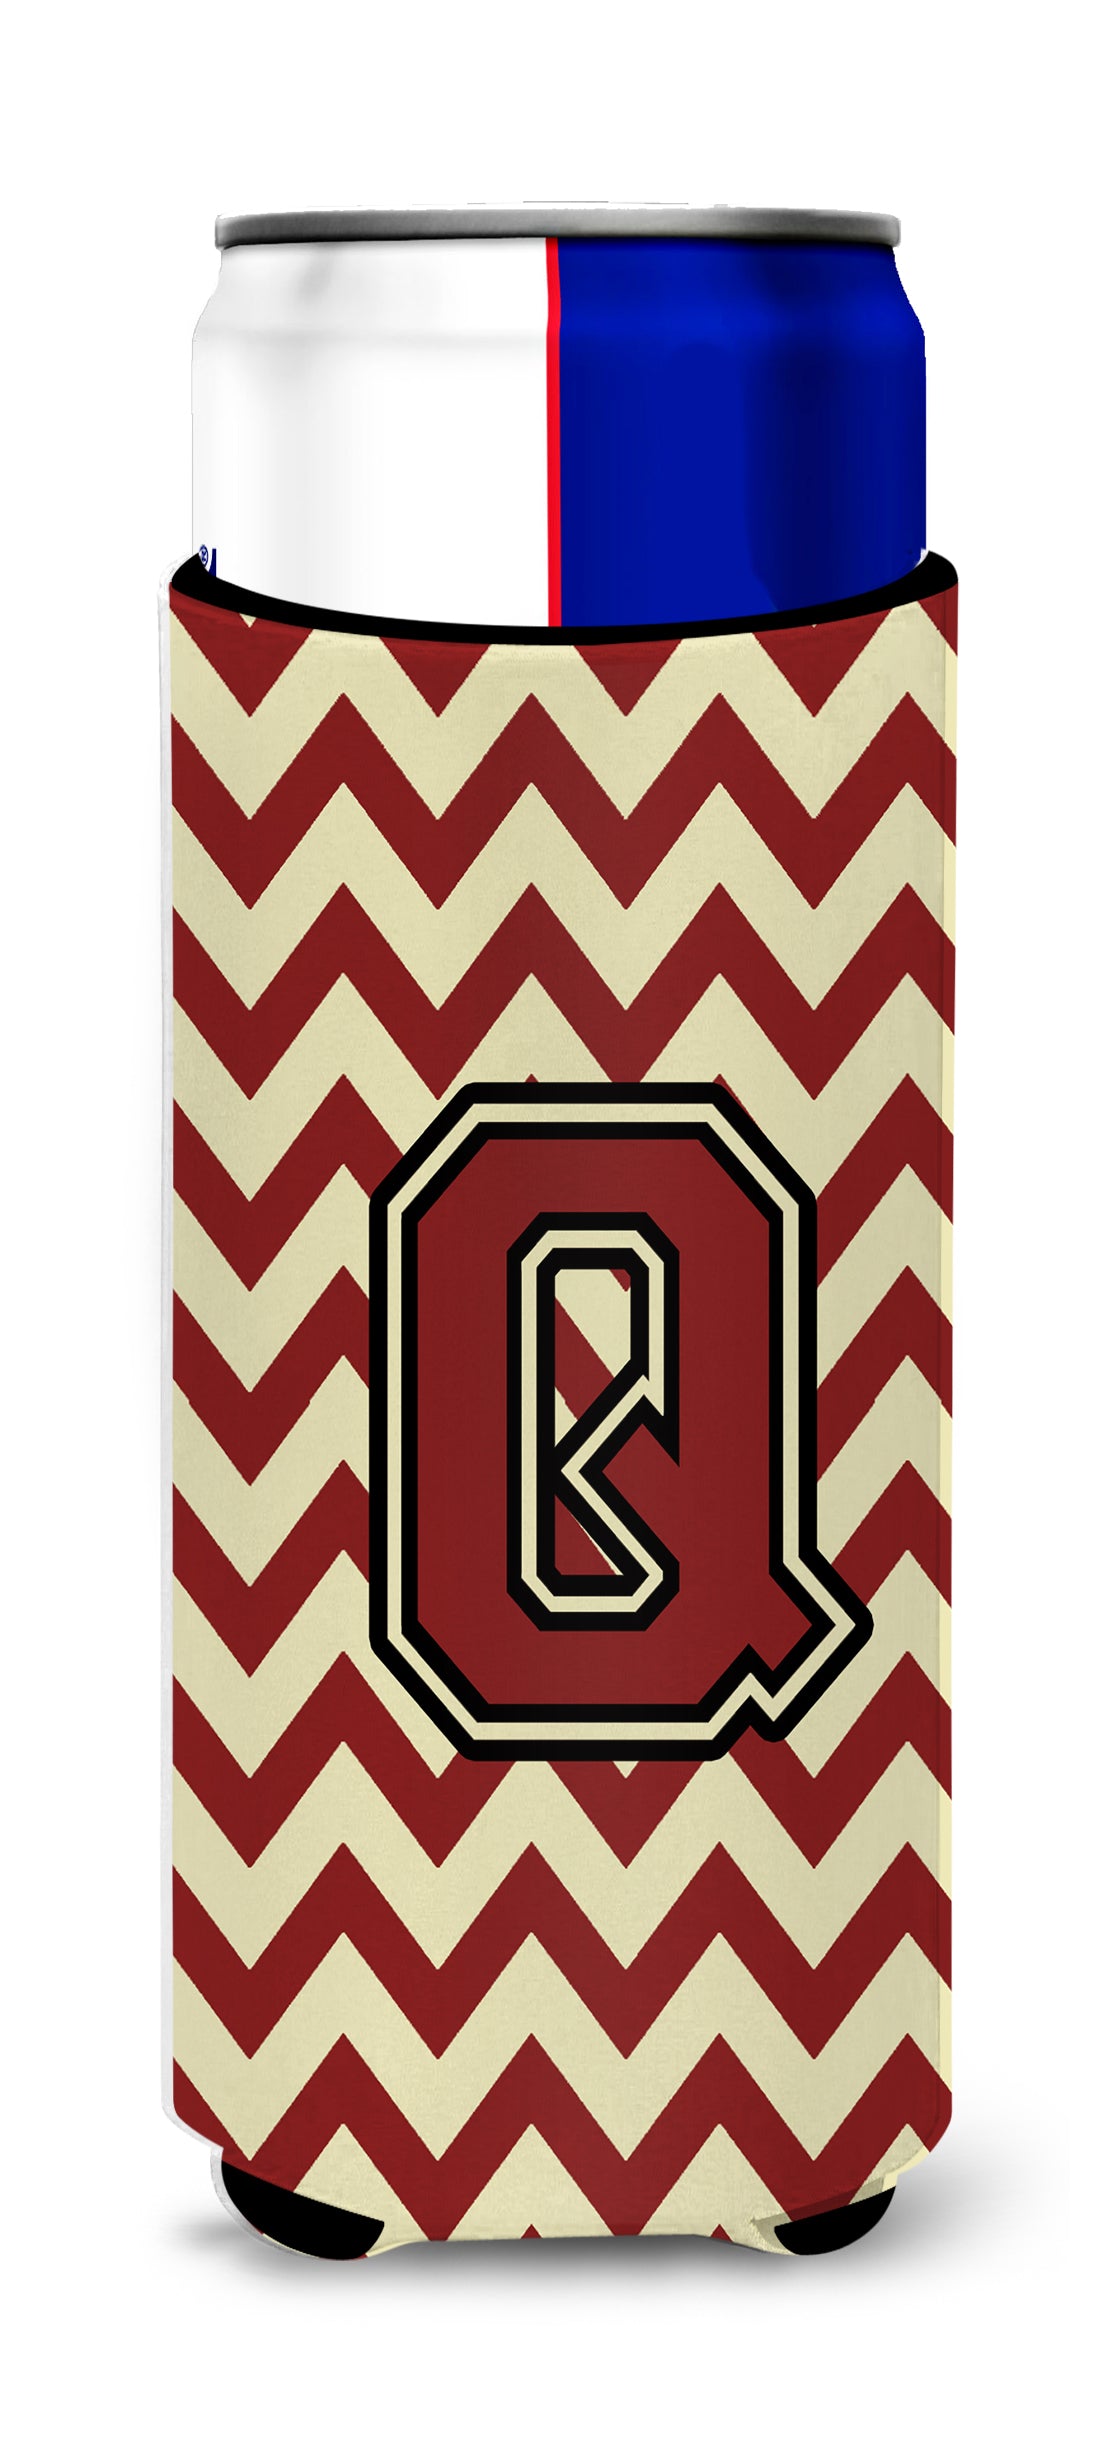 Letter Q Chevron Maroon and Gold Ultra Beverage Insulators for slim cans CJ1061-QMUK.